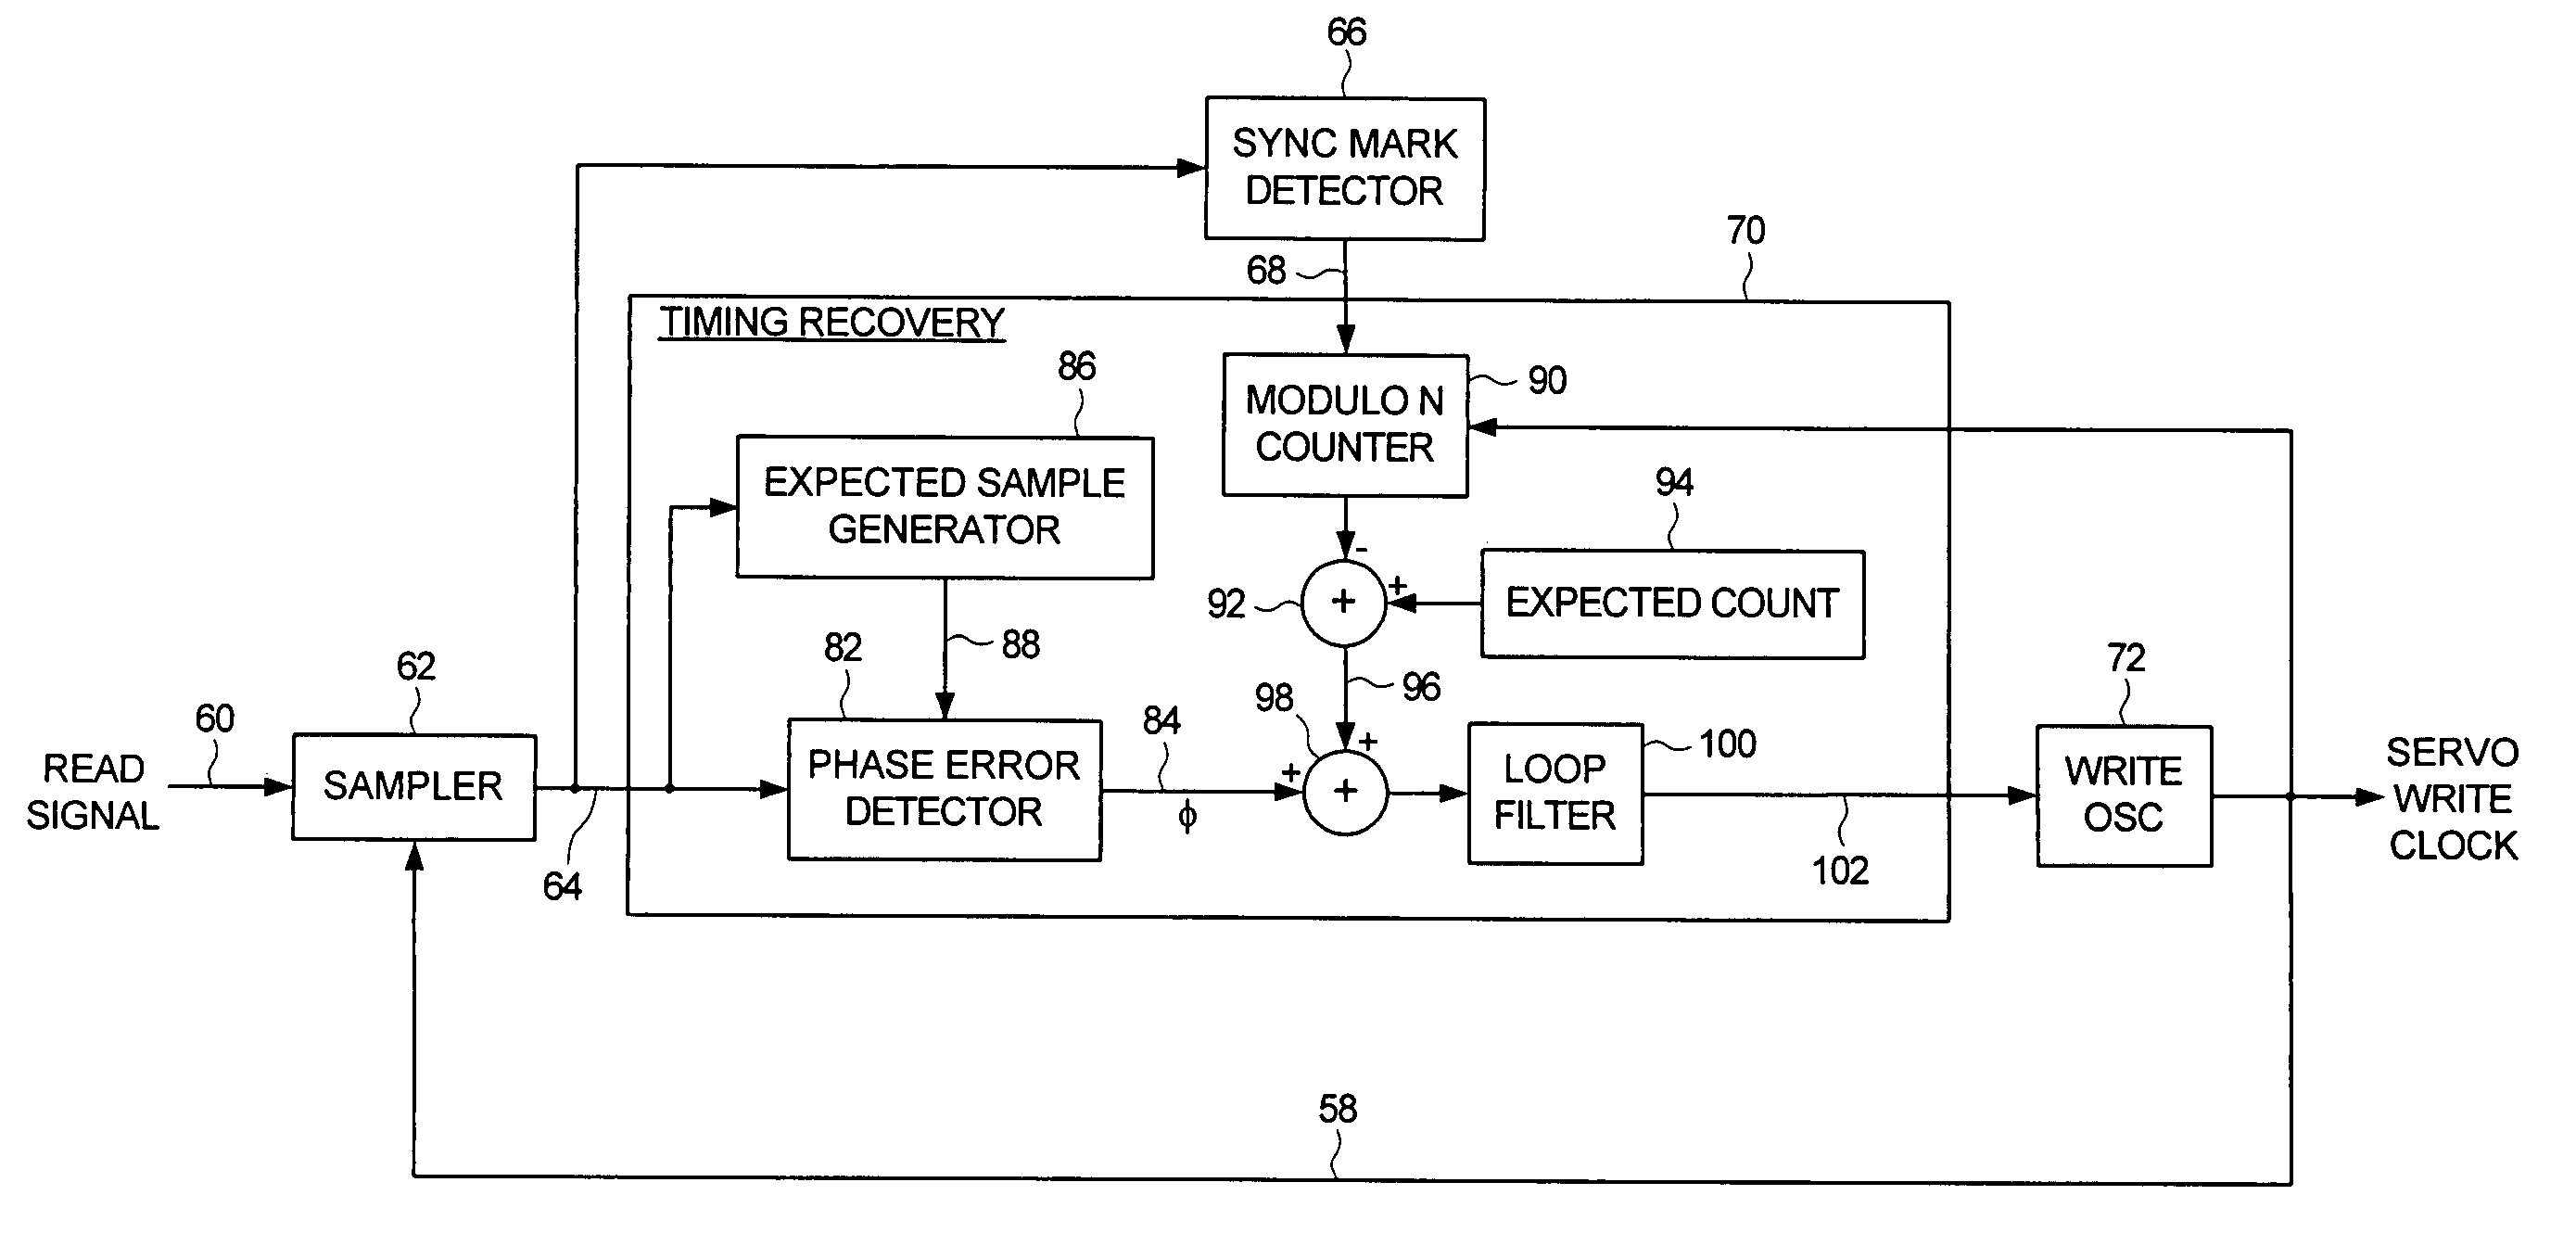 Servo writing a disk drive by synchronizing a servo write clock to a reference pattern on the disk and compensating for repeatable phase error